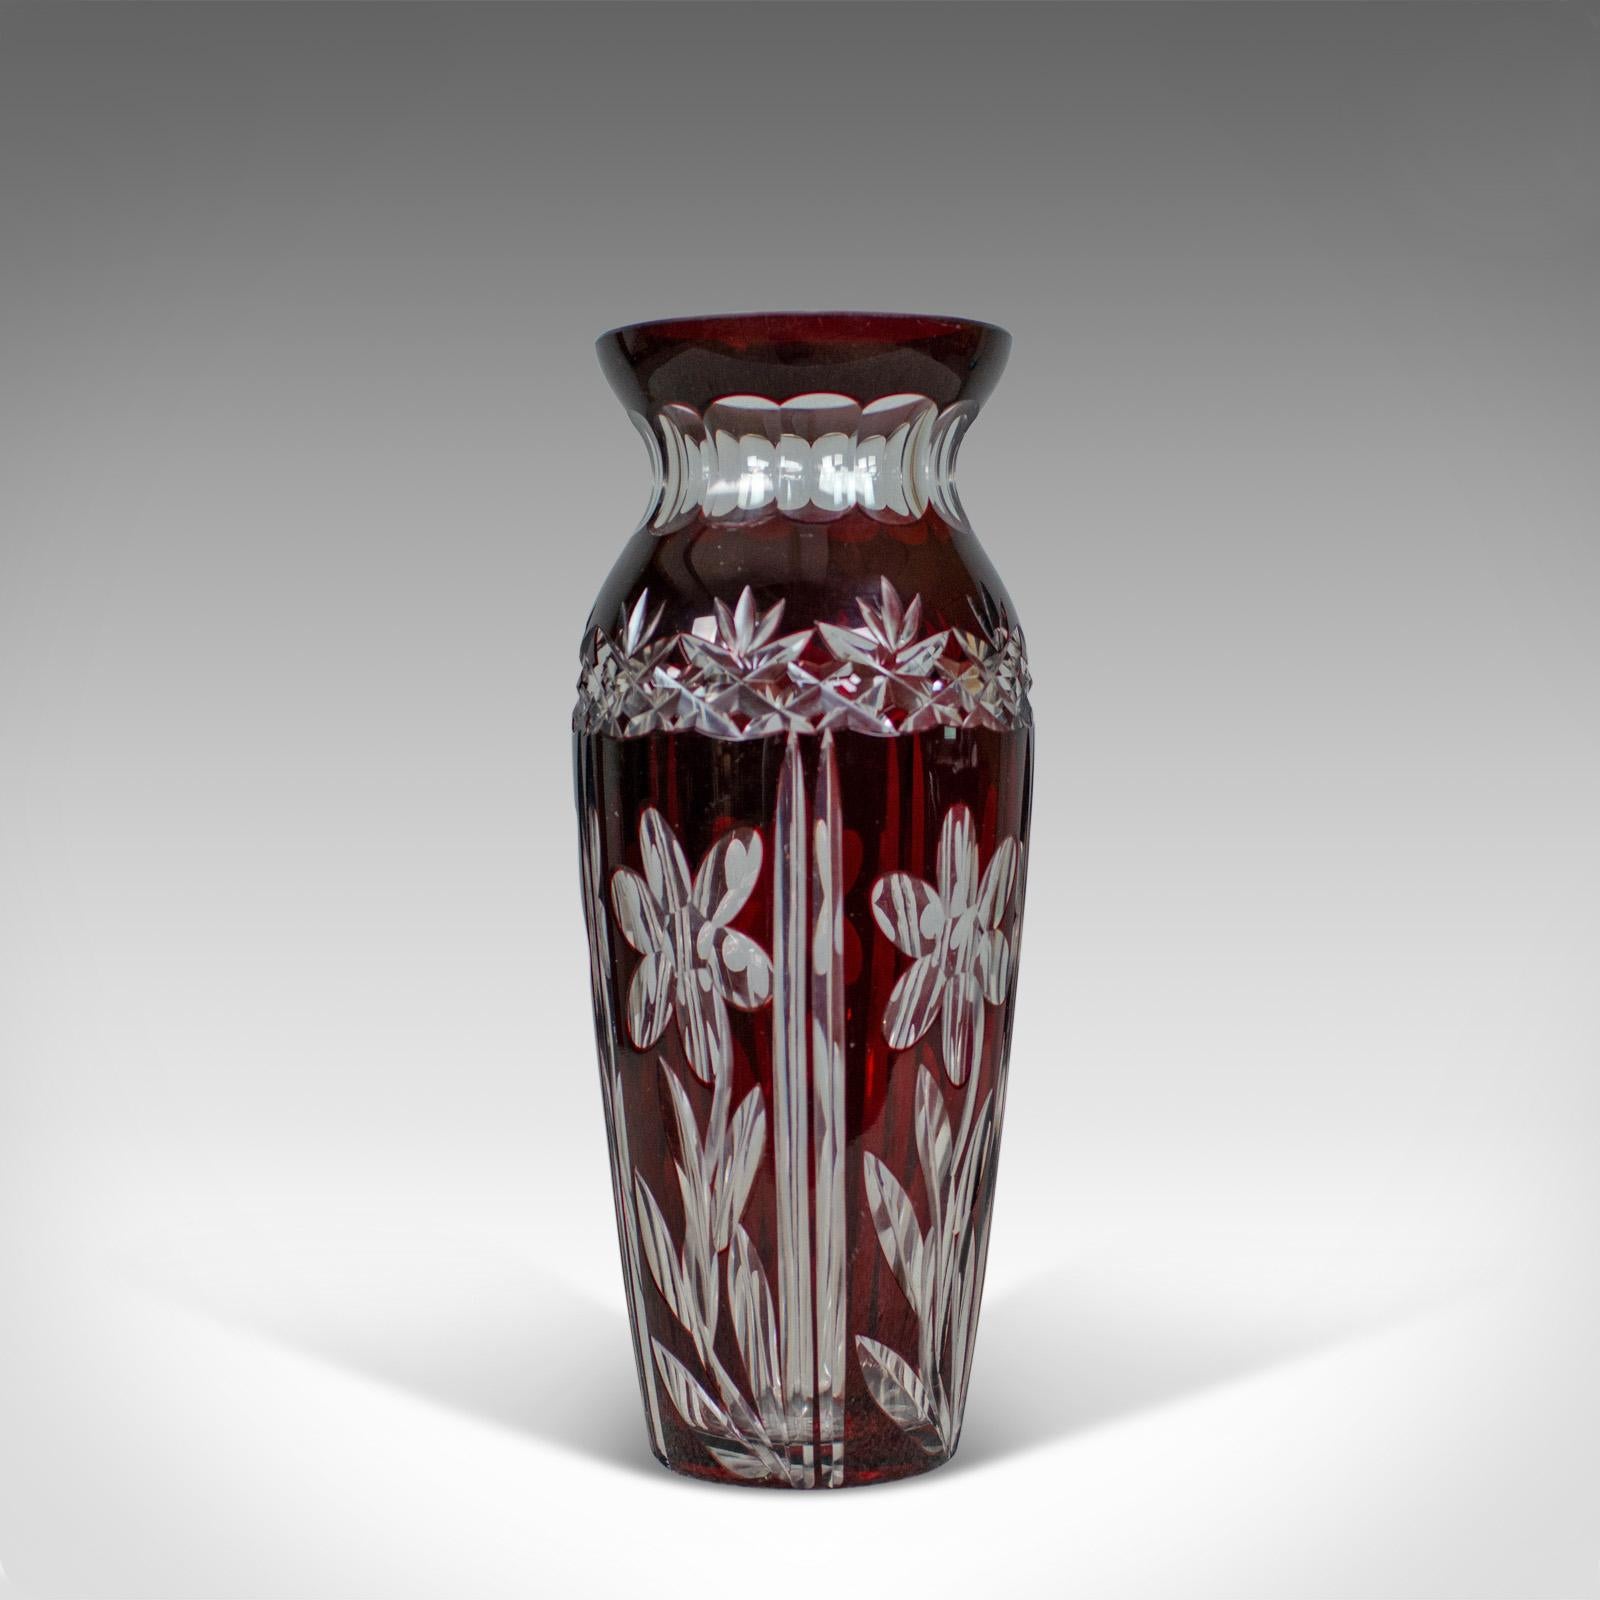 This is a vintage baluster glass vase, a claret-colored cut glass vase in the Art Deco taste from the mid-20th century.

Attractive vase with a striking claret color
Cut decoration to all facets
In good proportion and of quality